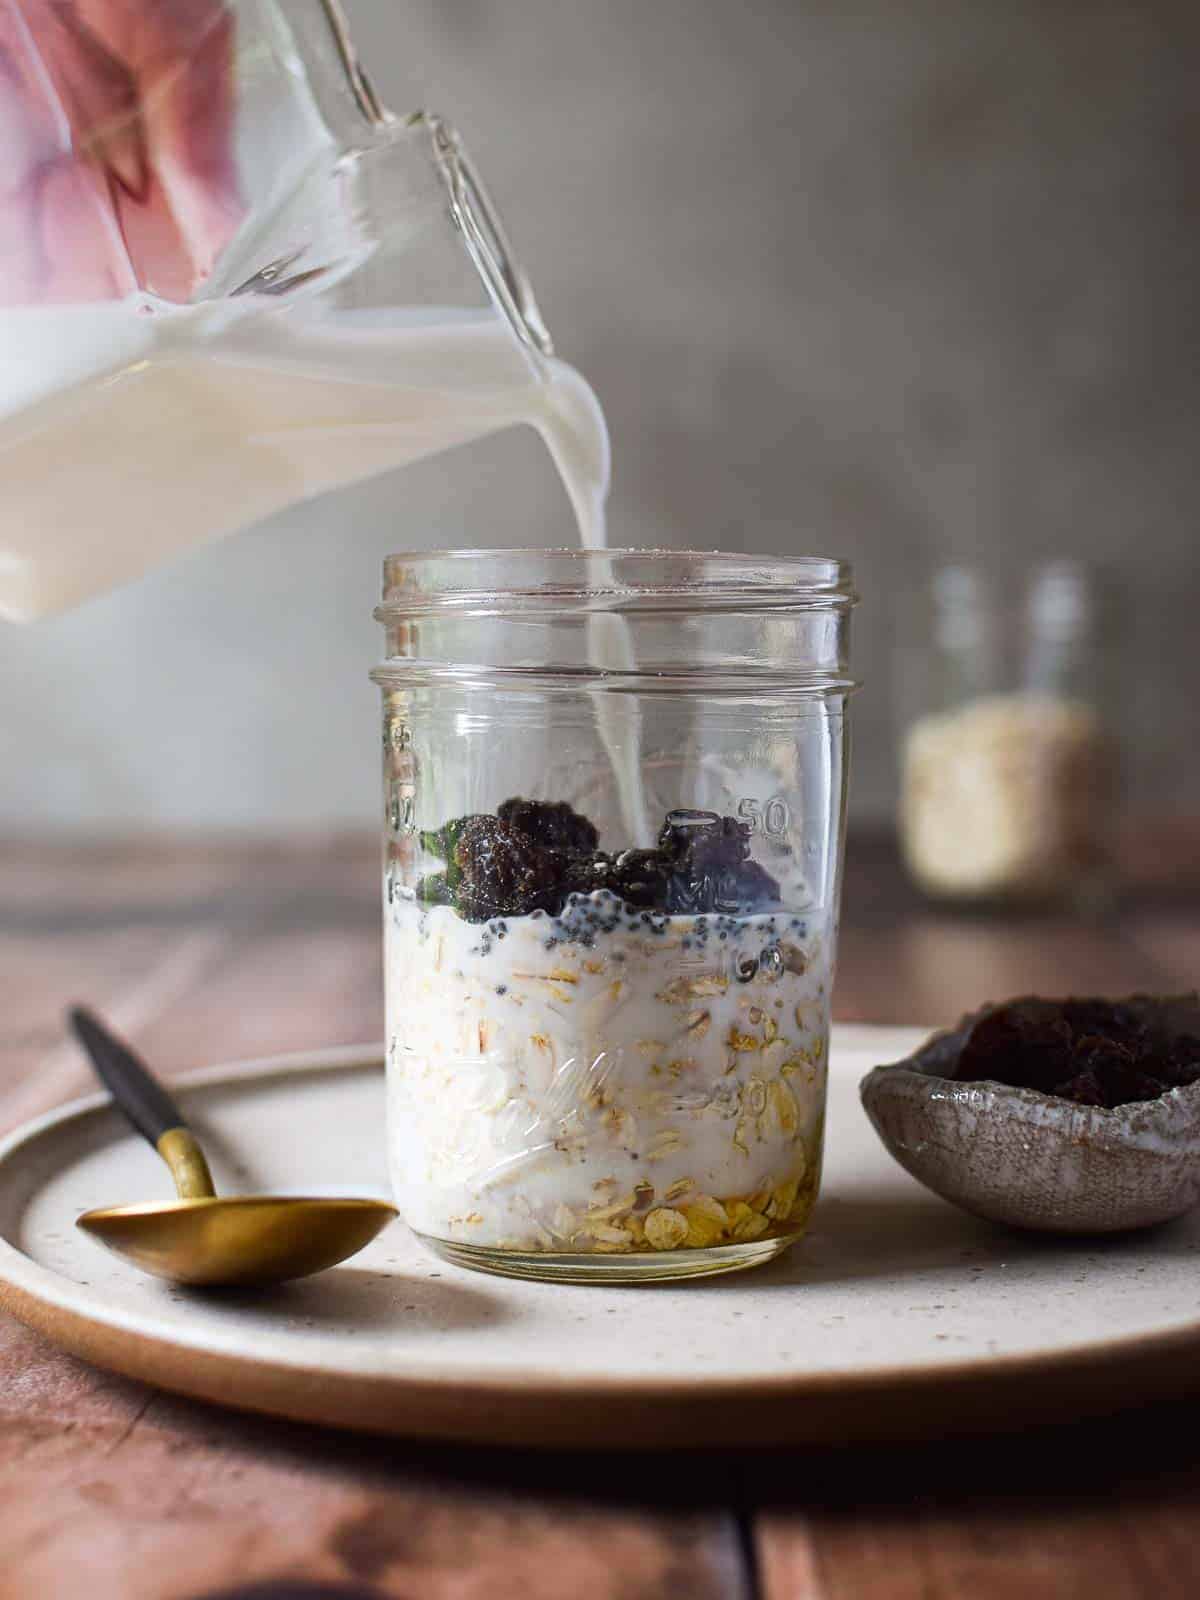 Milk is poured into a Mason jar to prepare overnight oats.